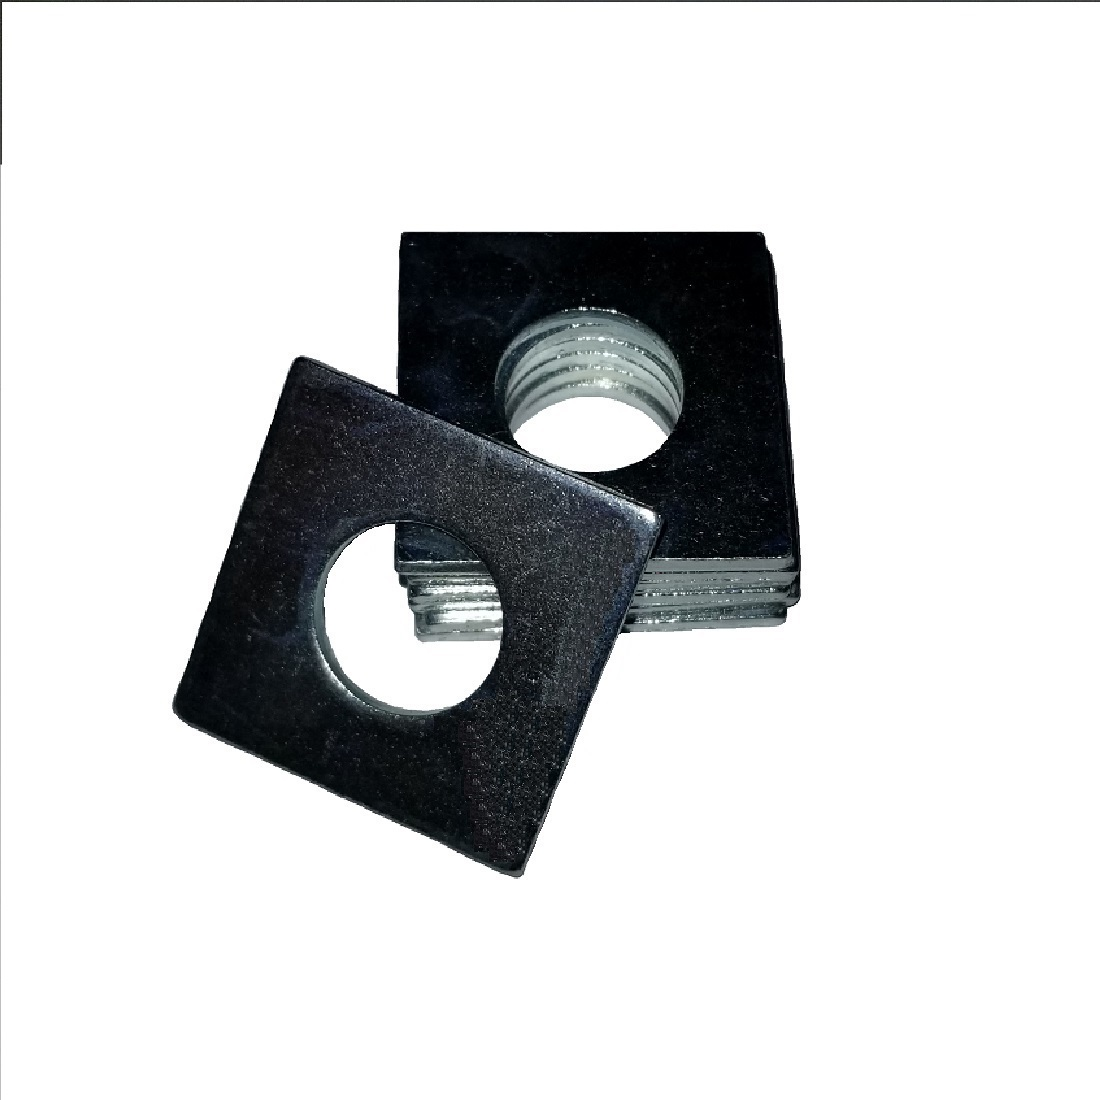 Square OD Washer - 0.187 ID, 0.430 OD, 0.070 Thick, Low Carbon Steel - Soft, Zinc & Clear